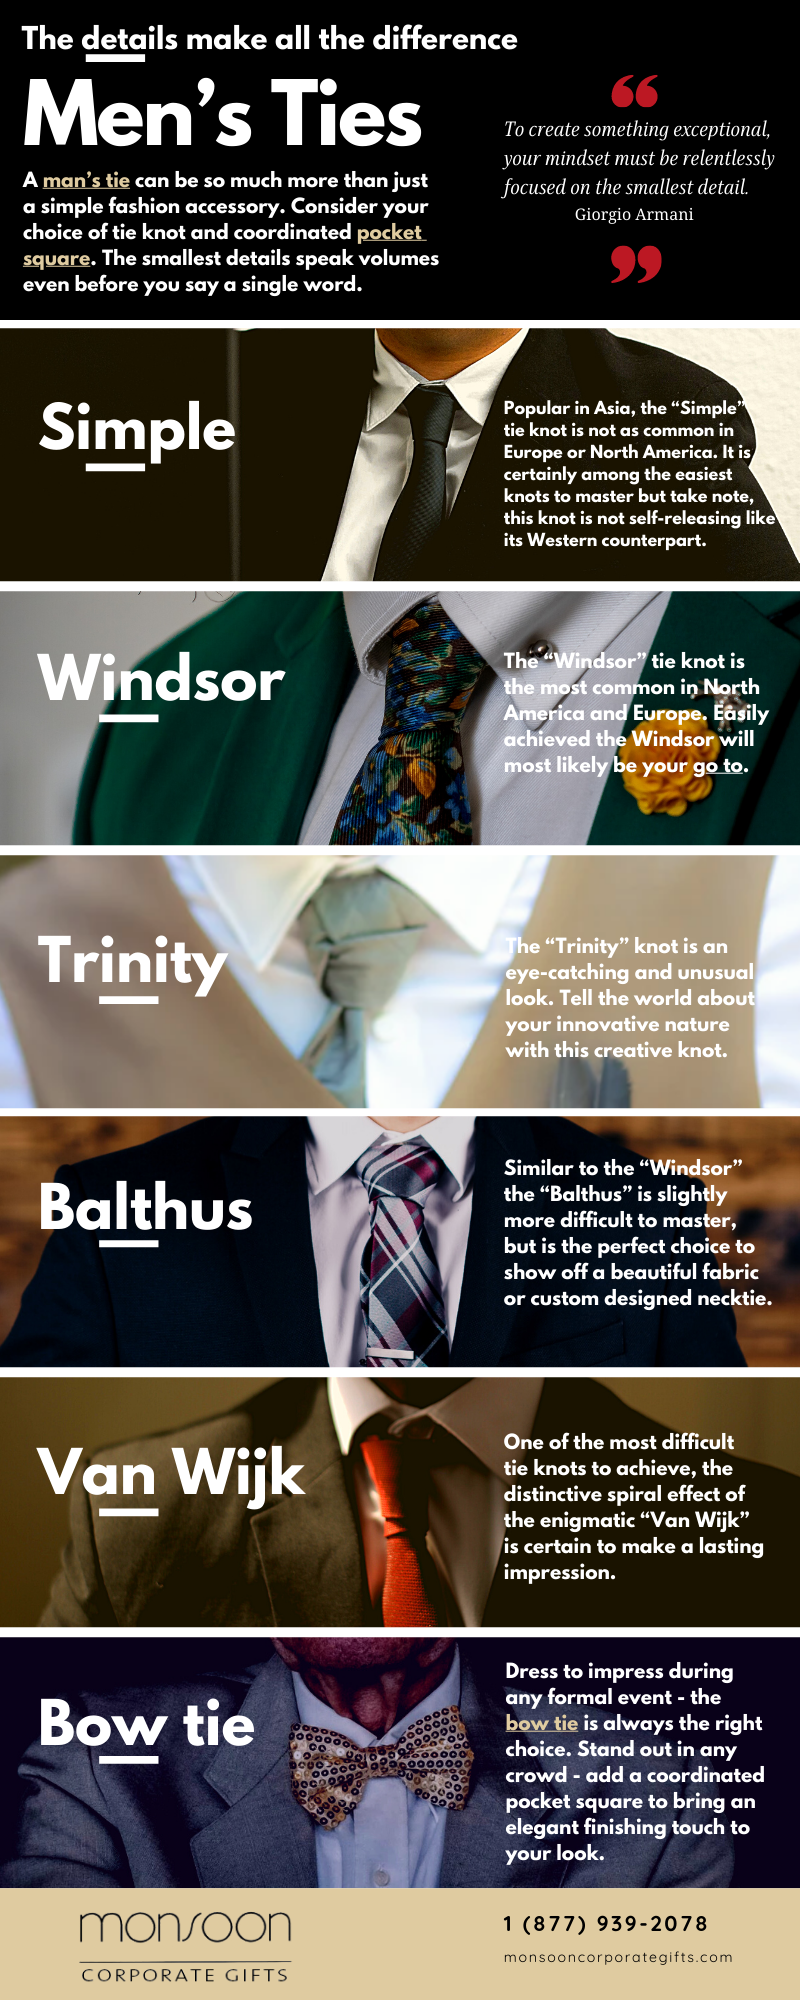 When it comes to men’s ties, a knot is much more than it seems.